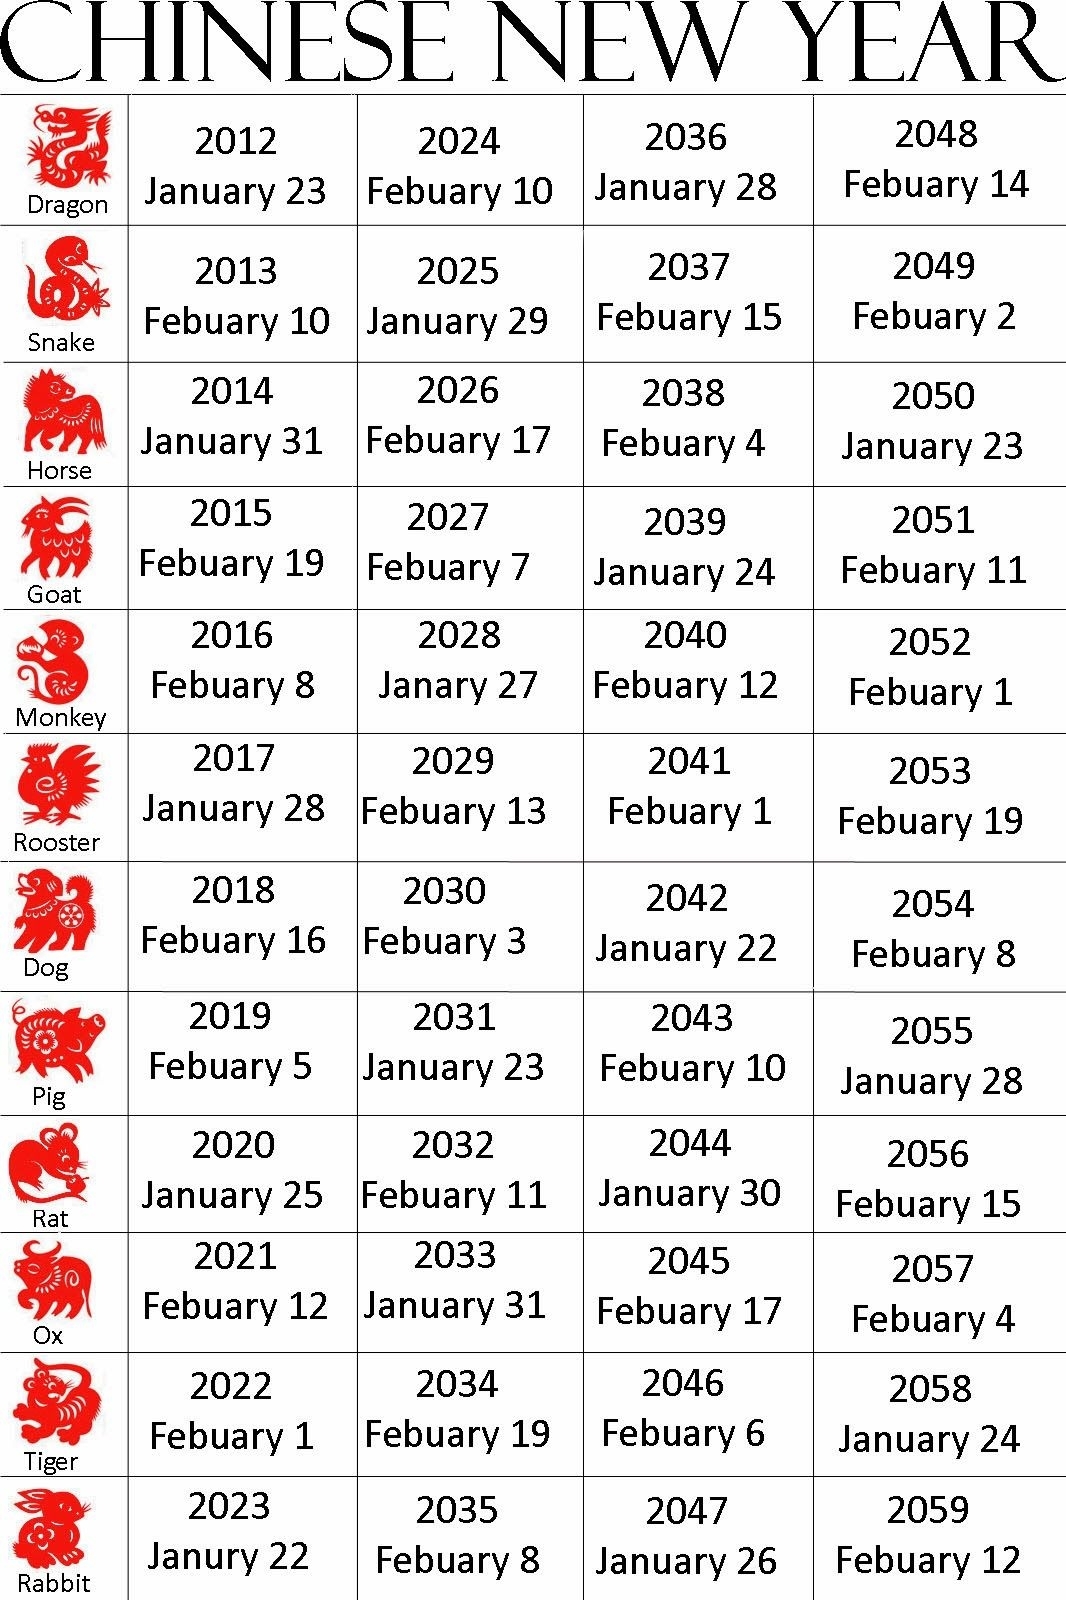 Chinese+New+Year 1,066×1,600 Pixels | Chinese Calendar